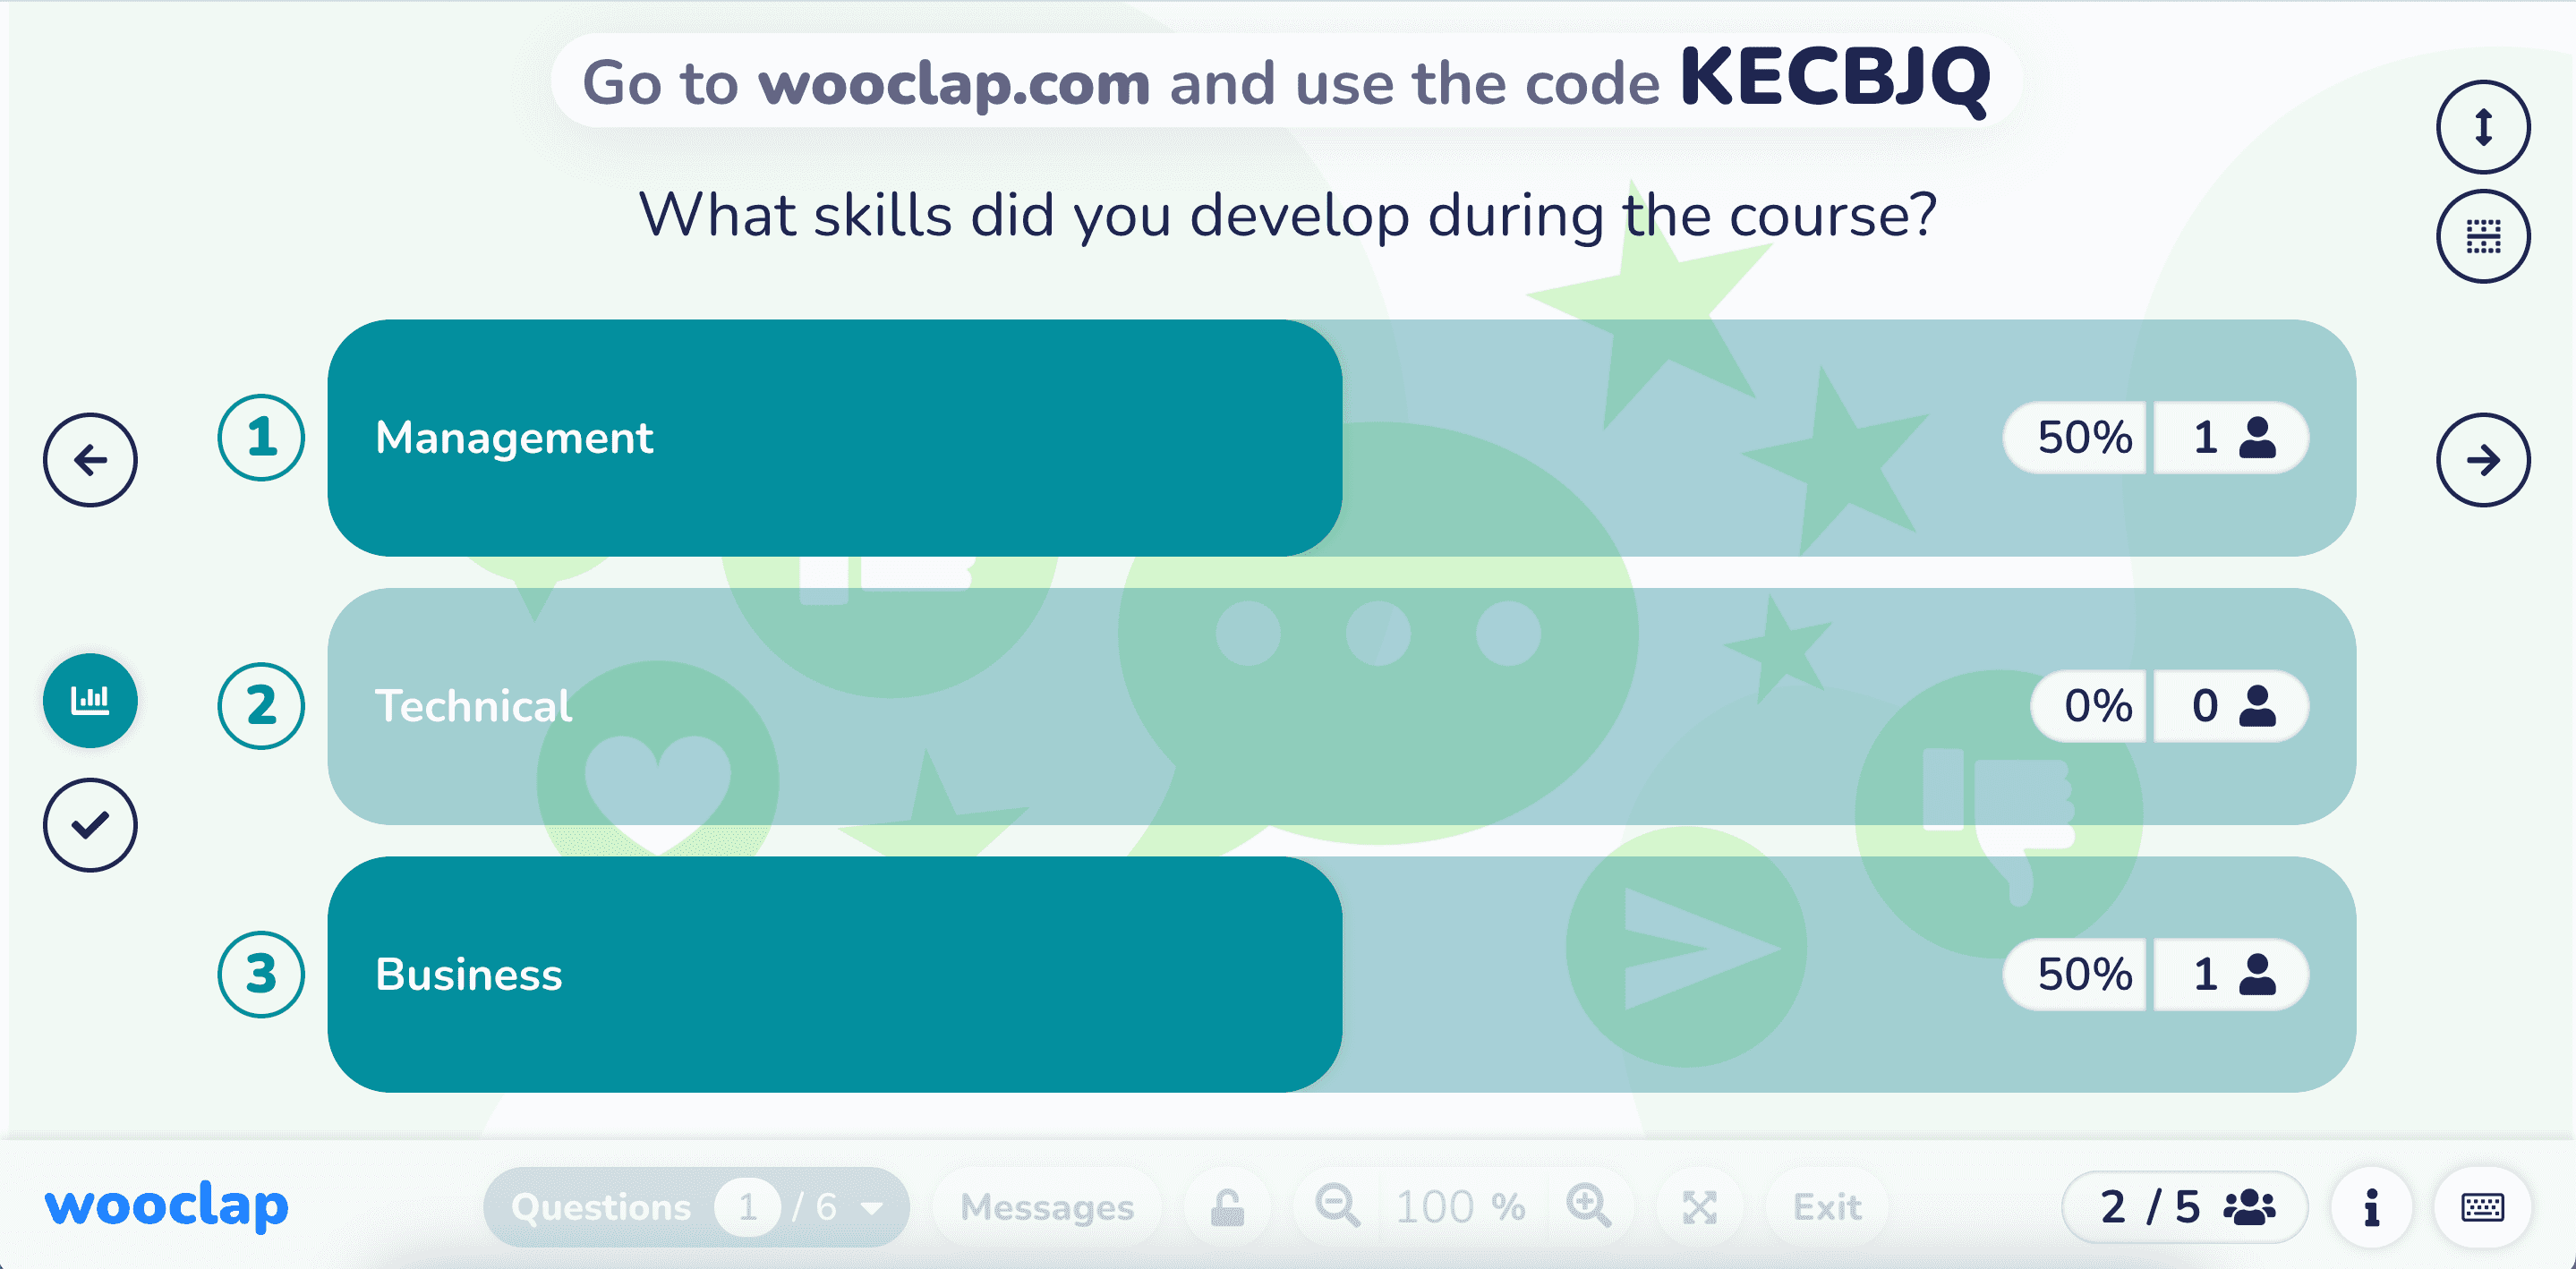 What skills did you develop during the course?